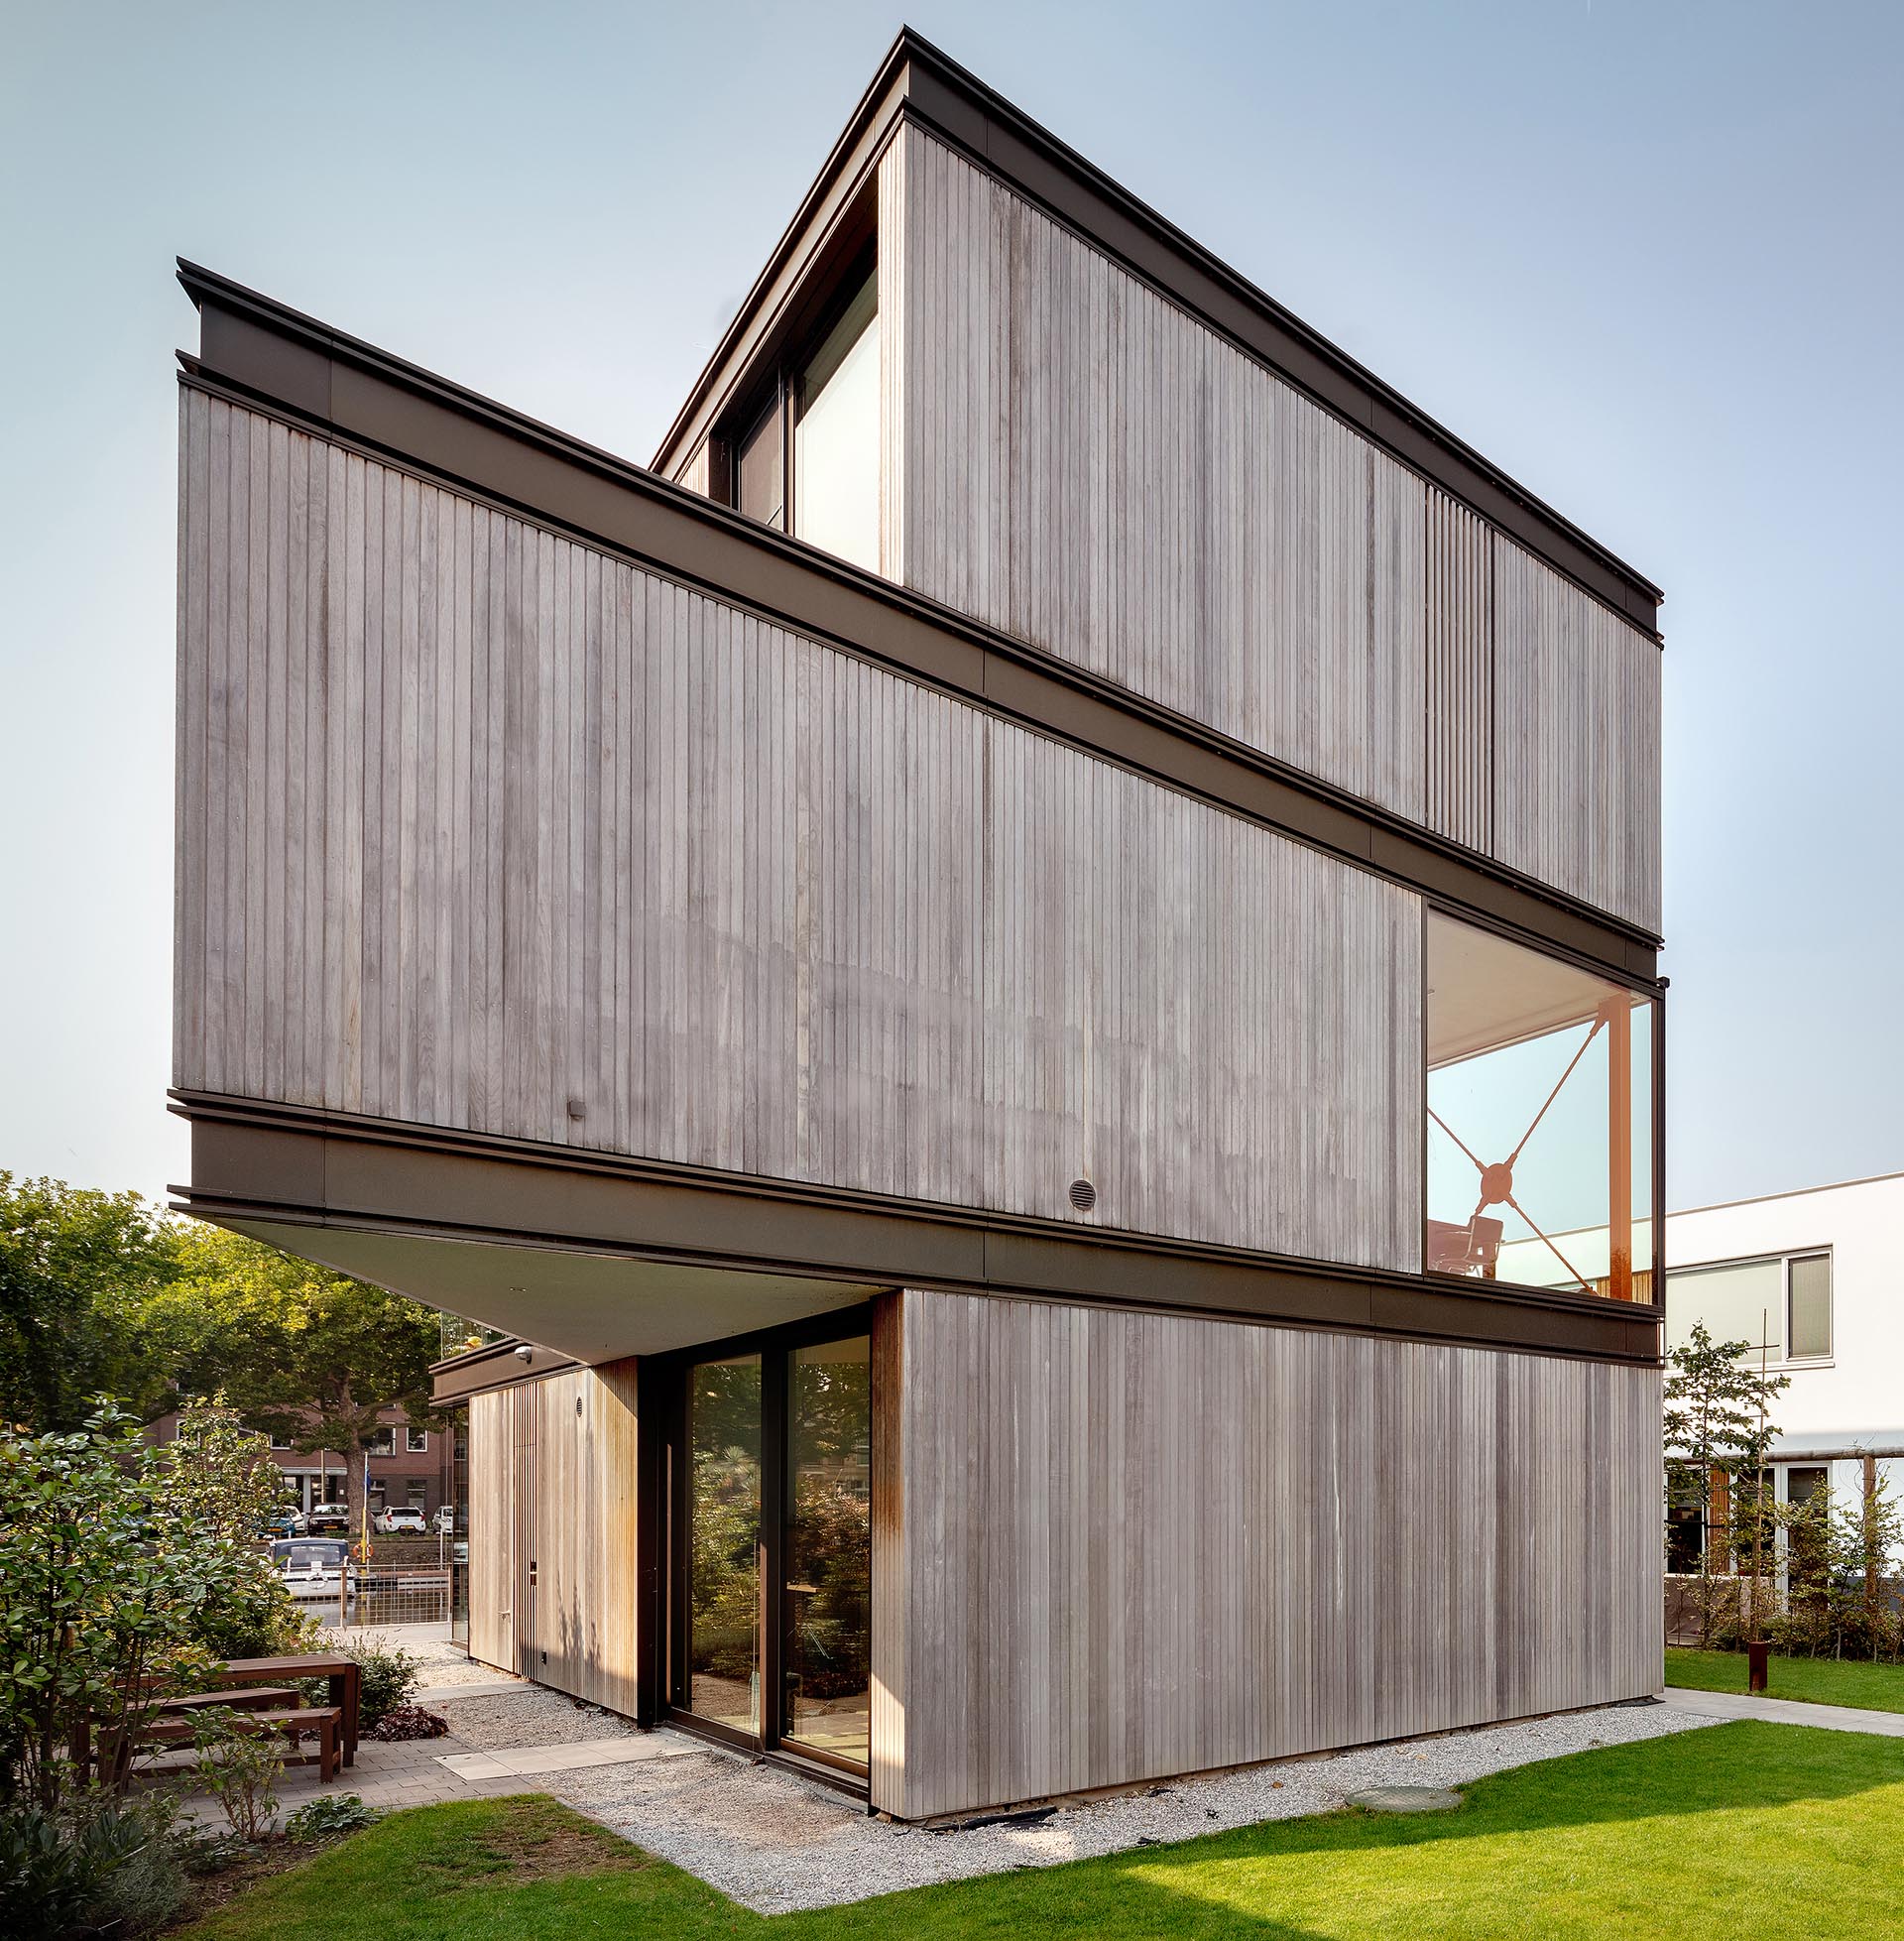 A modern house with an exterior of wood, metal, and glass.